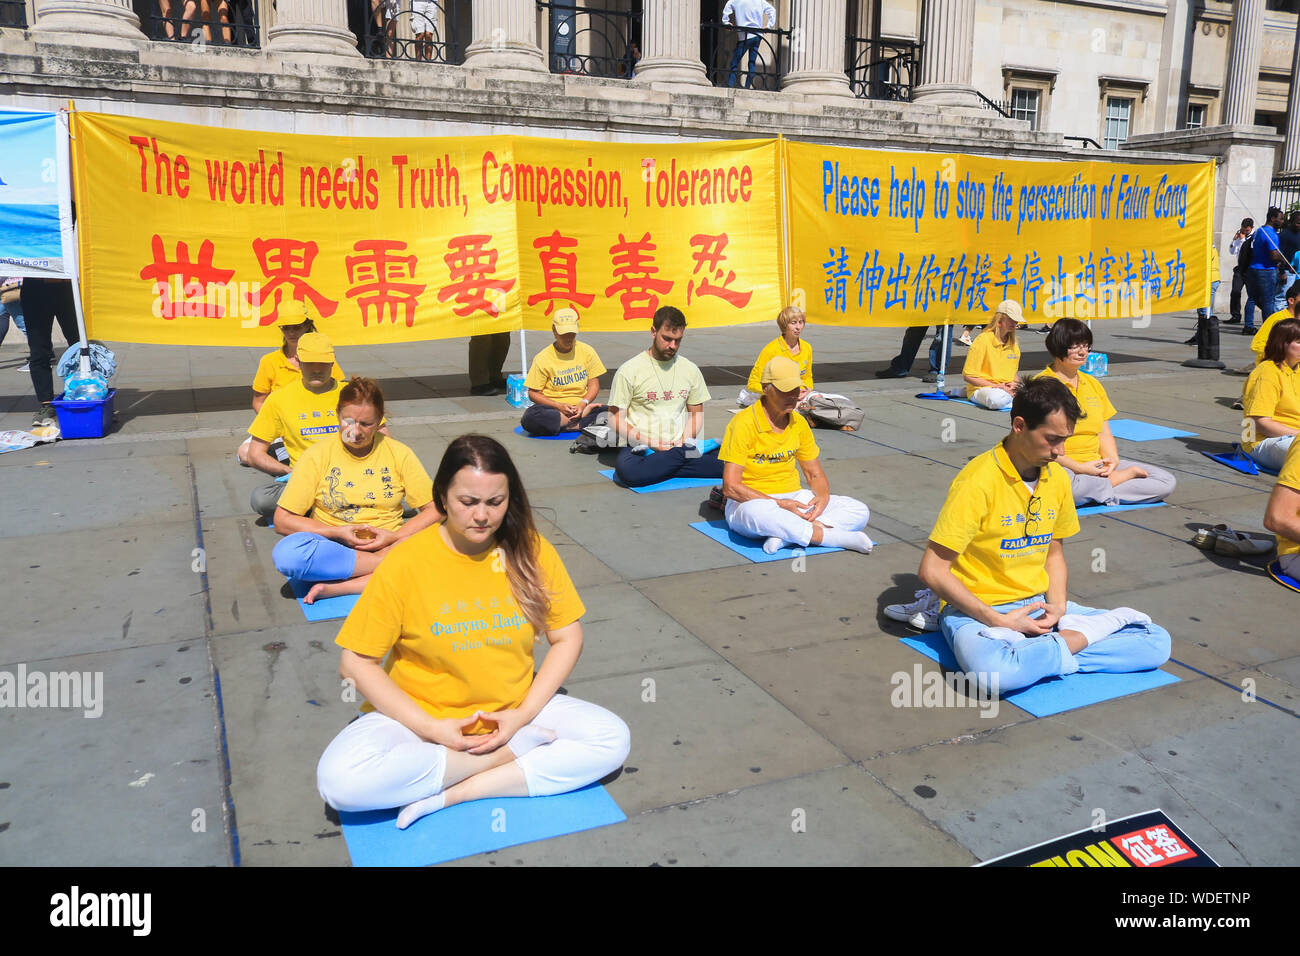 Members of the Falun Gong meditate in front of the National Gallery at the Trafalgar Square during the protest.Demonstration against their persecution in China. Falun Gong is Chinese religious spiritual practice that combines meditation and gong exercises with a moral philosophy cantered on the tenets of truthfulness, compassion, and forbearance. Stock Photo